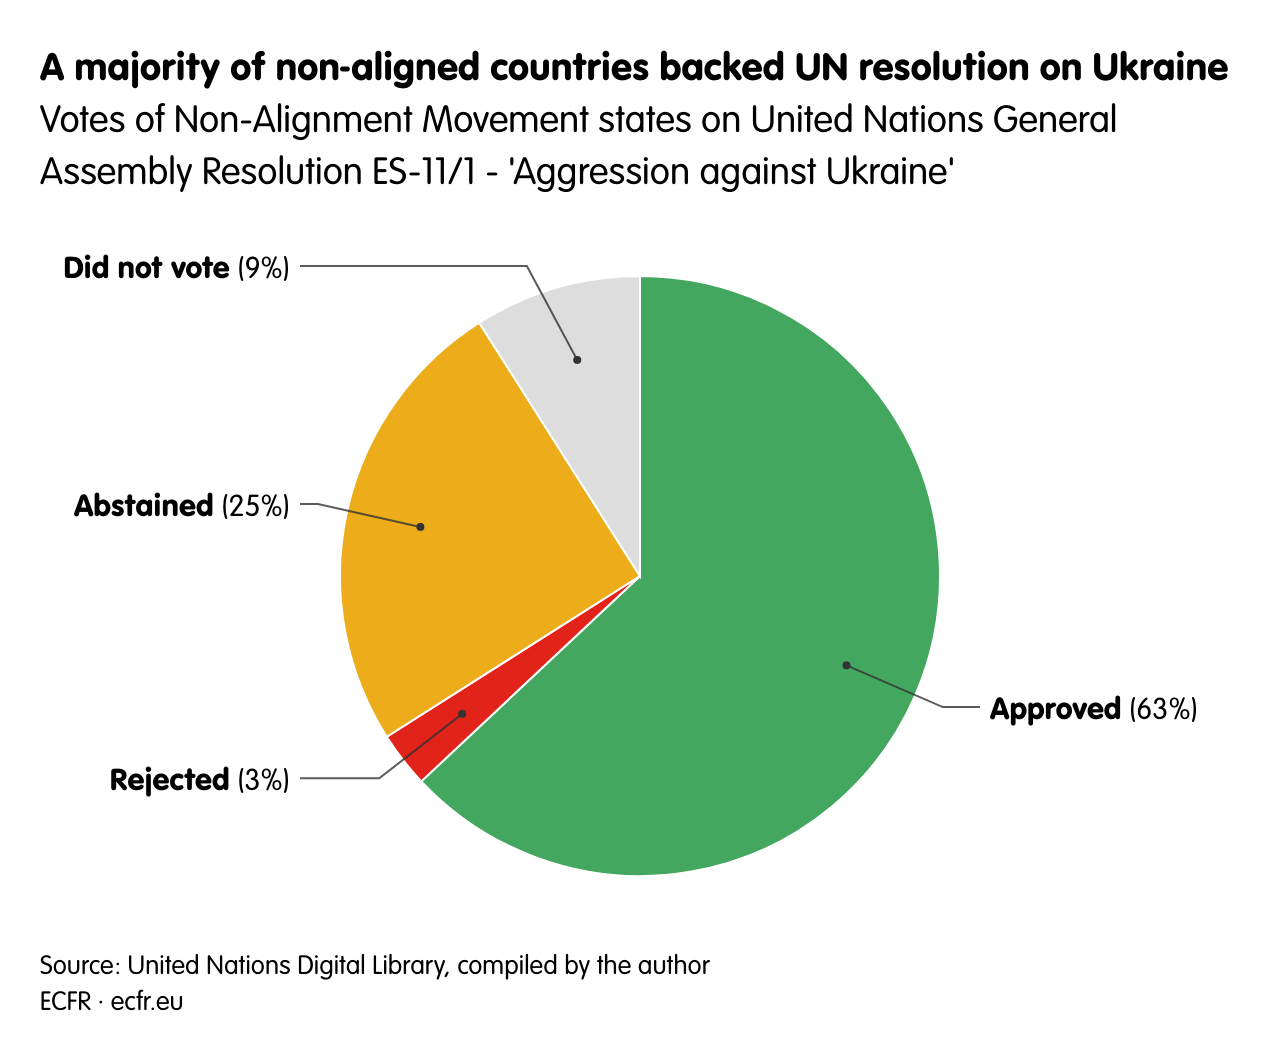 A majority of non-aligned countries backed UN resolution on Ukraine